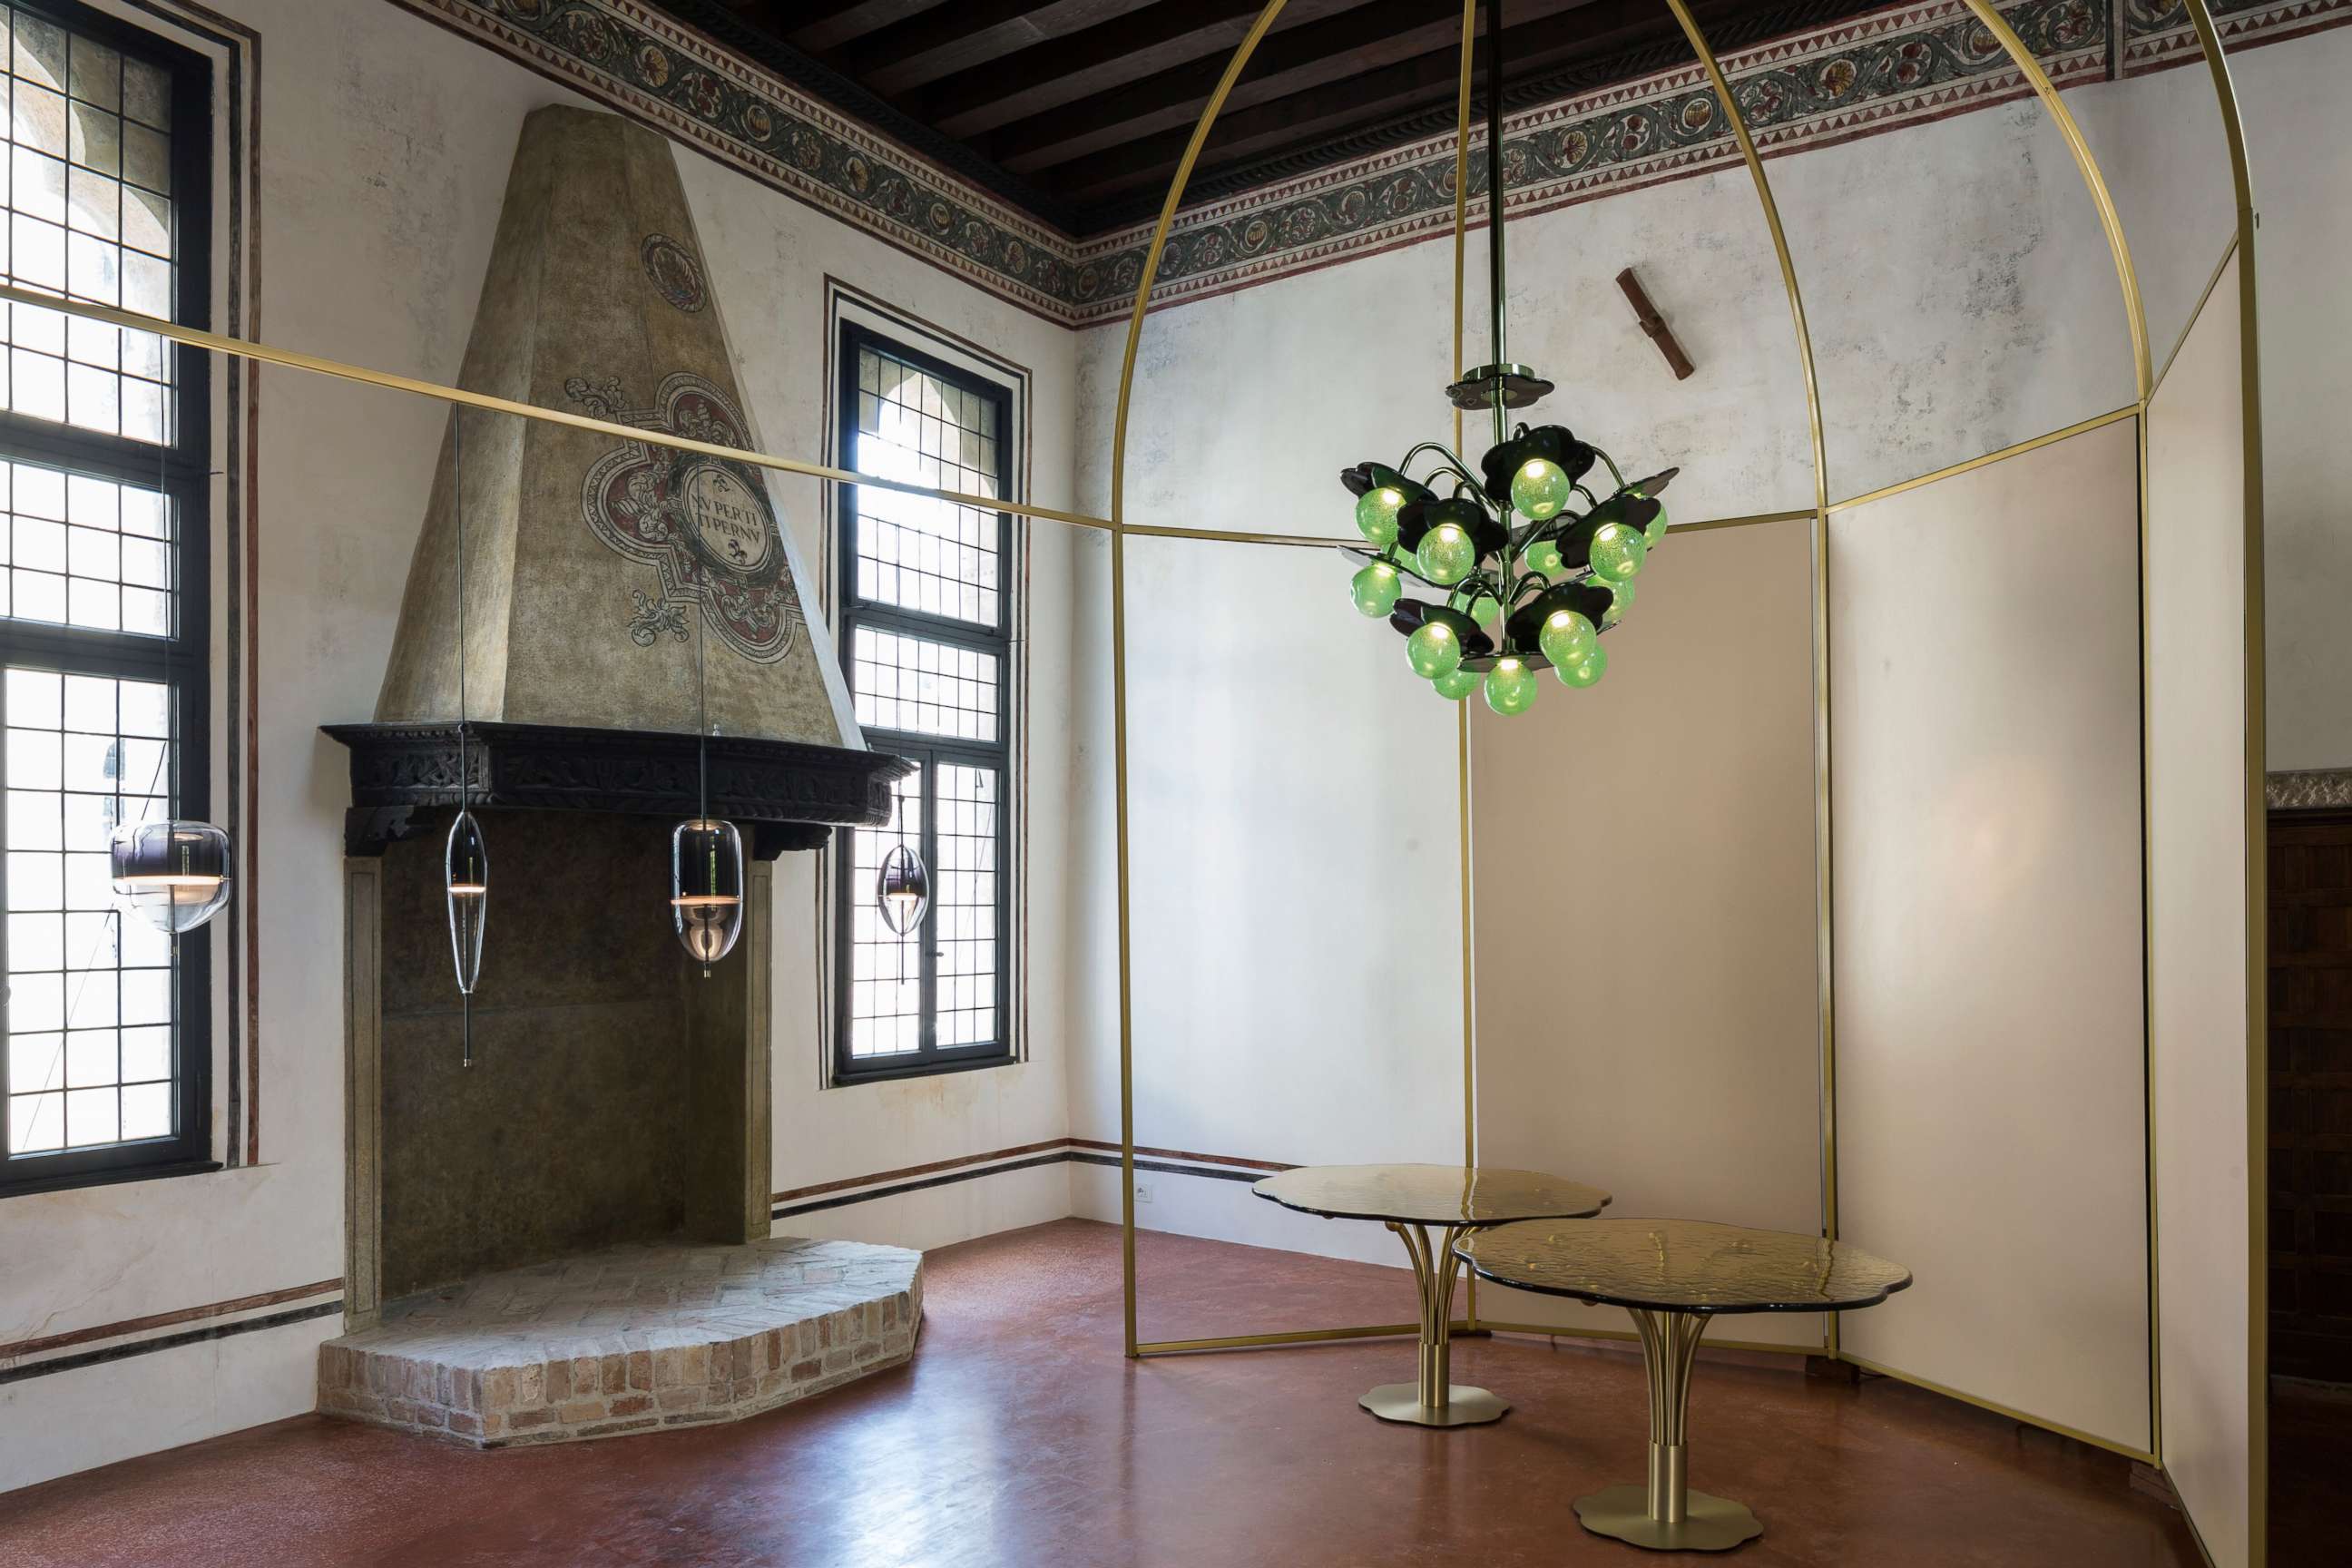 PHOTO: Contemporary designer India Mahdavi partnered with WonderGlass to make her Clover chandelier with glass crafted on Murano island.